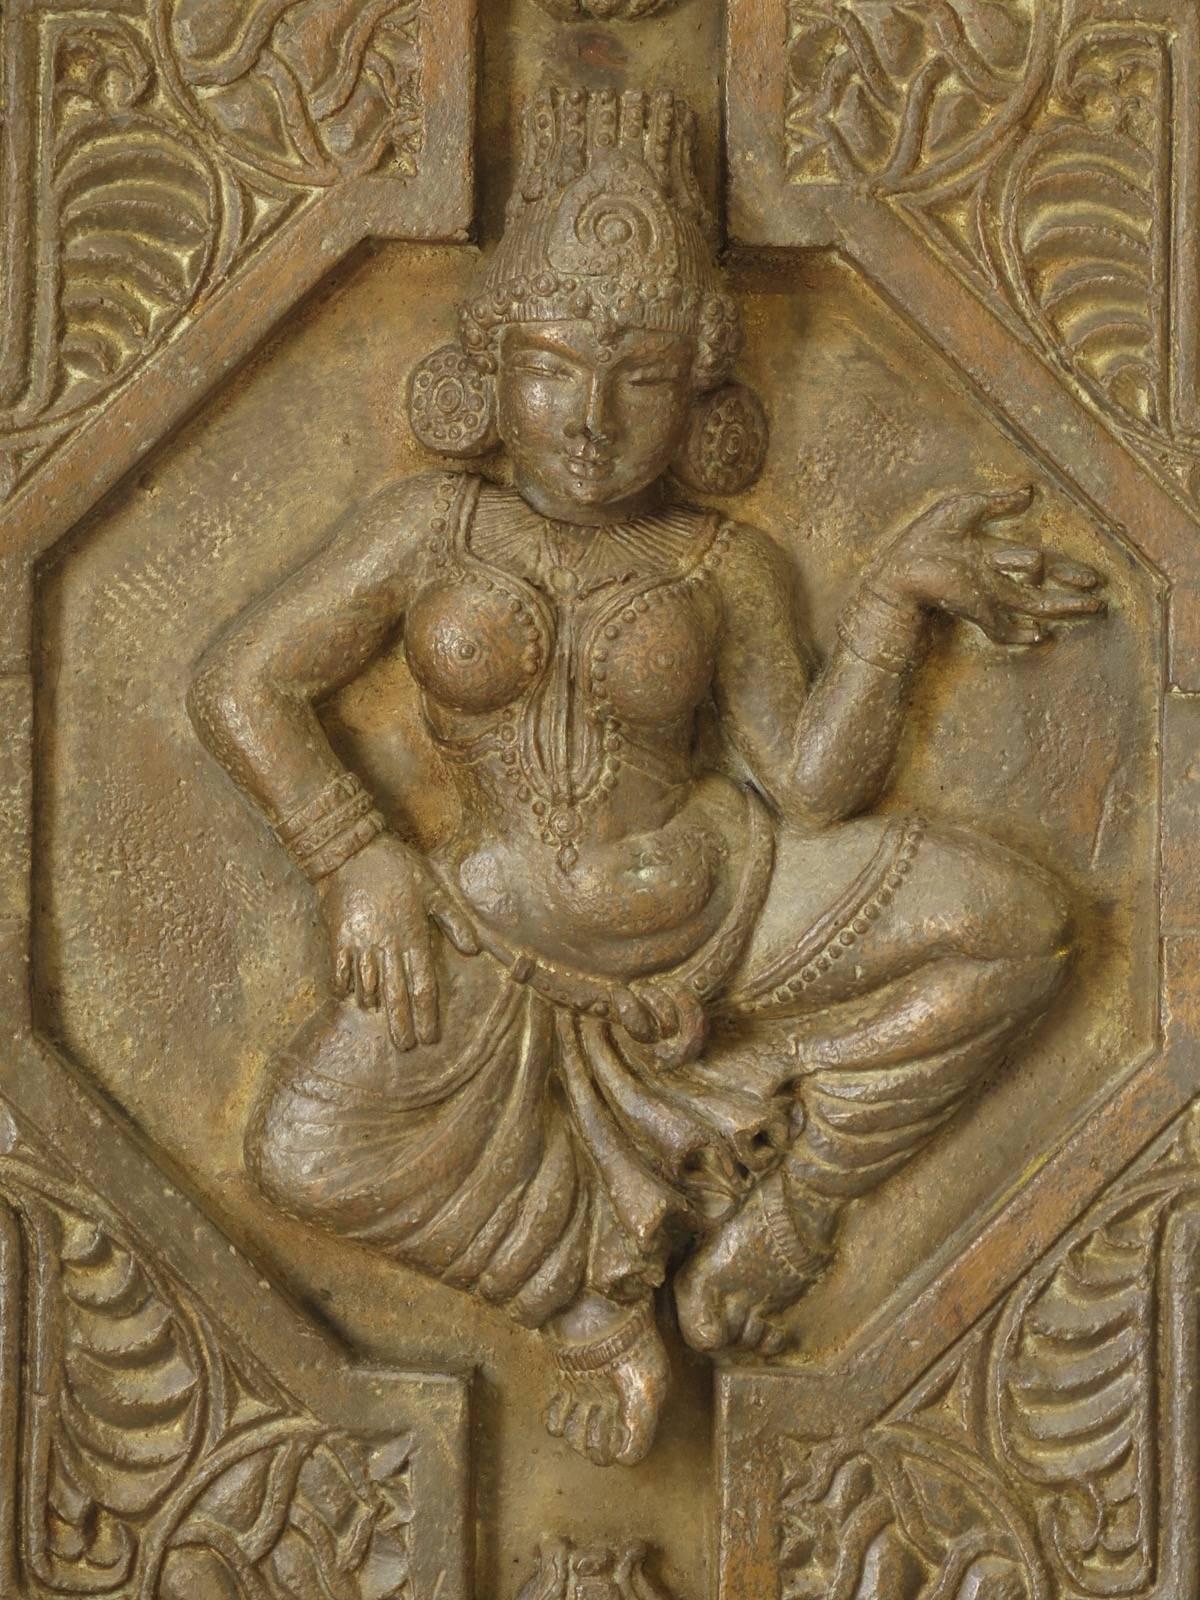 Large fiberglass panel with a bronze-coloured paint finish, representing a dancing Indian deity. Possibly originally made as part of a theatre decor. An unusual and quite effective piece.